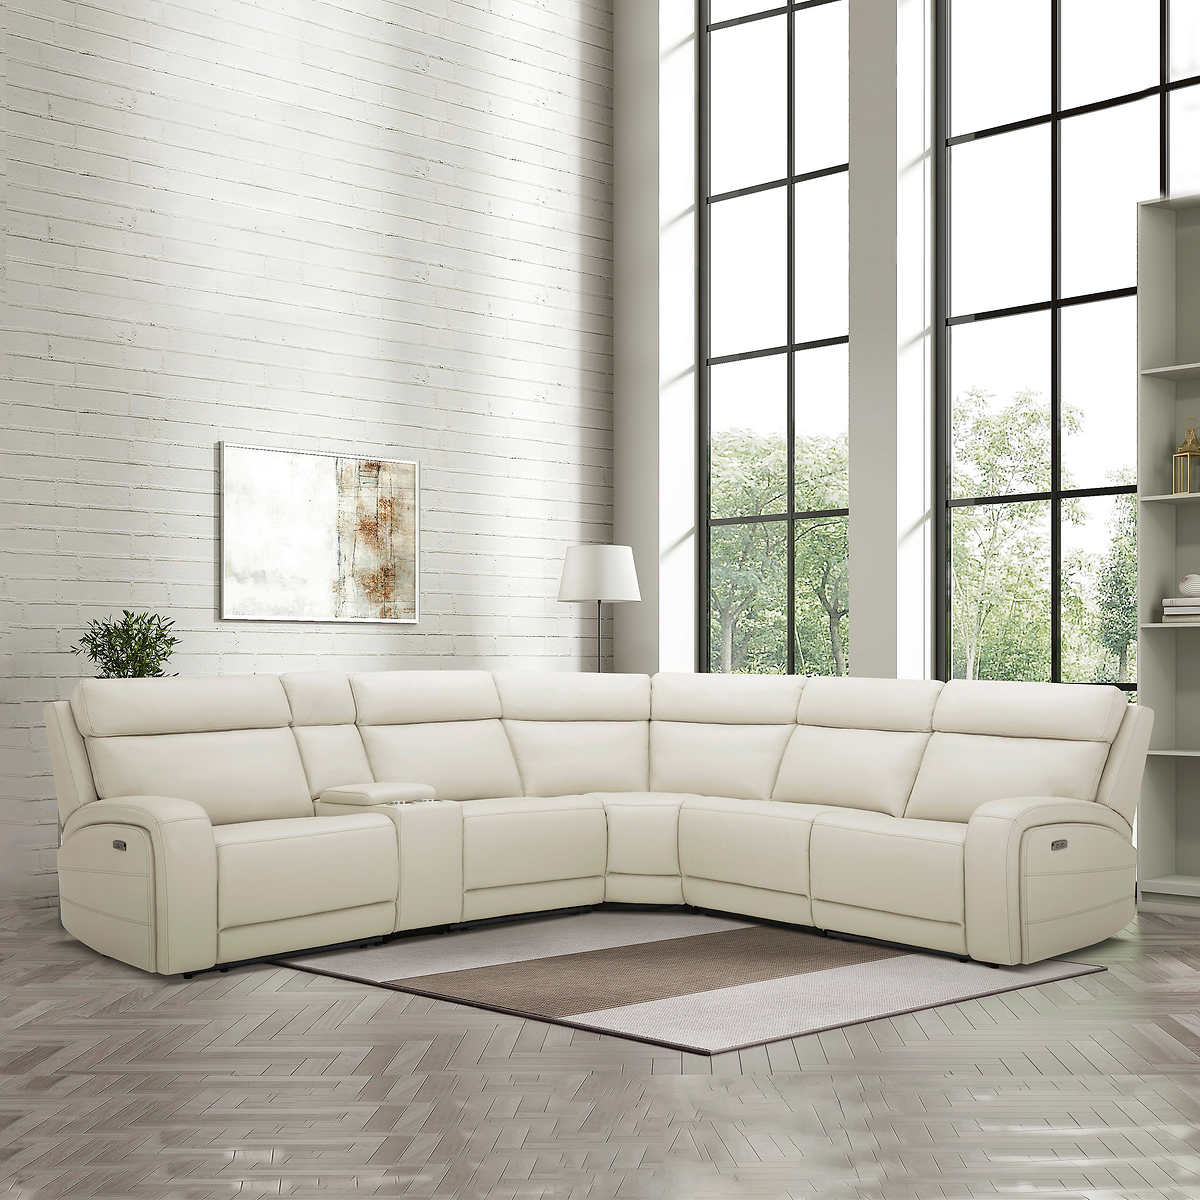 Leather Power Reclining Sectional, Off White Leather Recliners